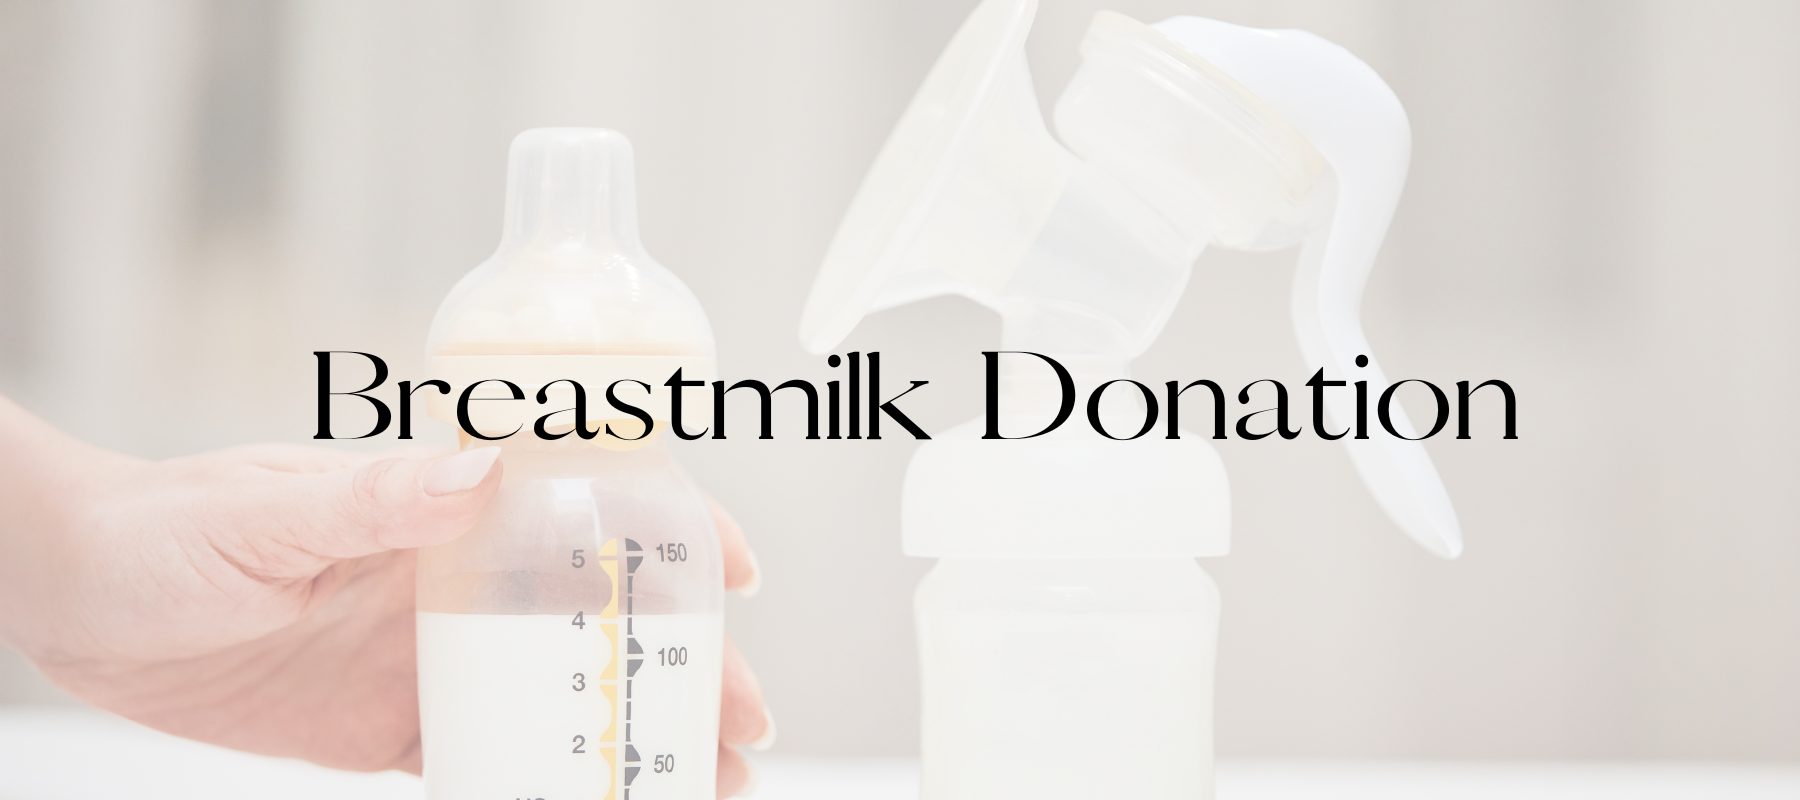 Breastmilk Donation - Guest Blog by Nadine Muller